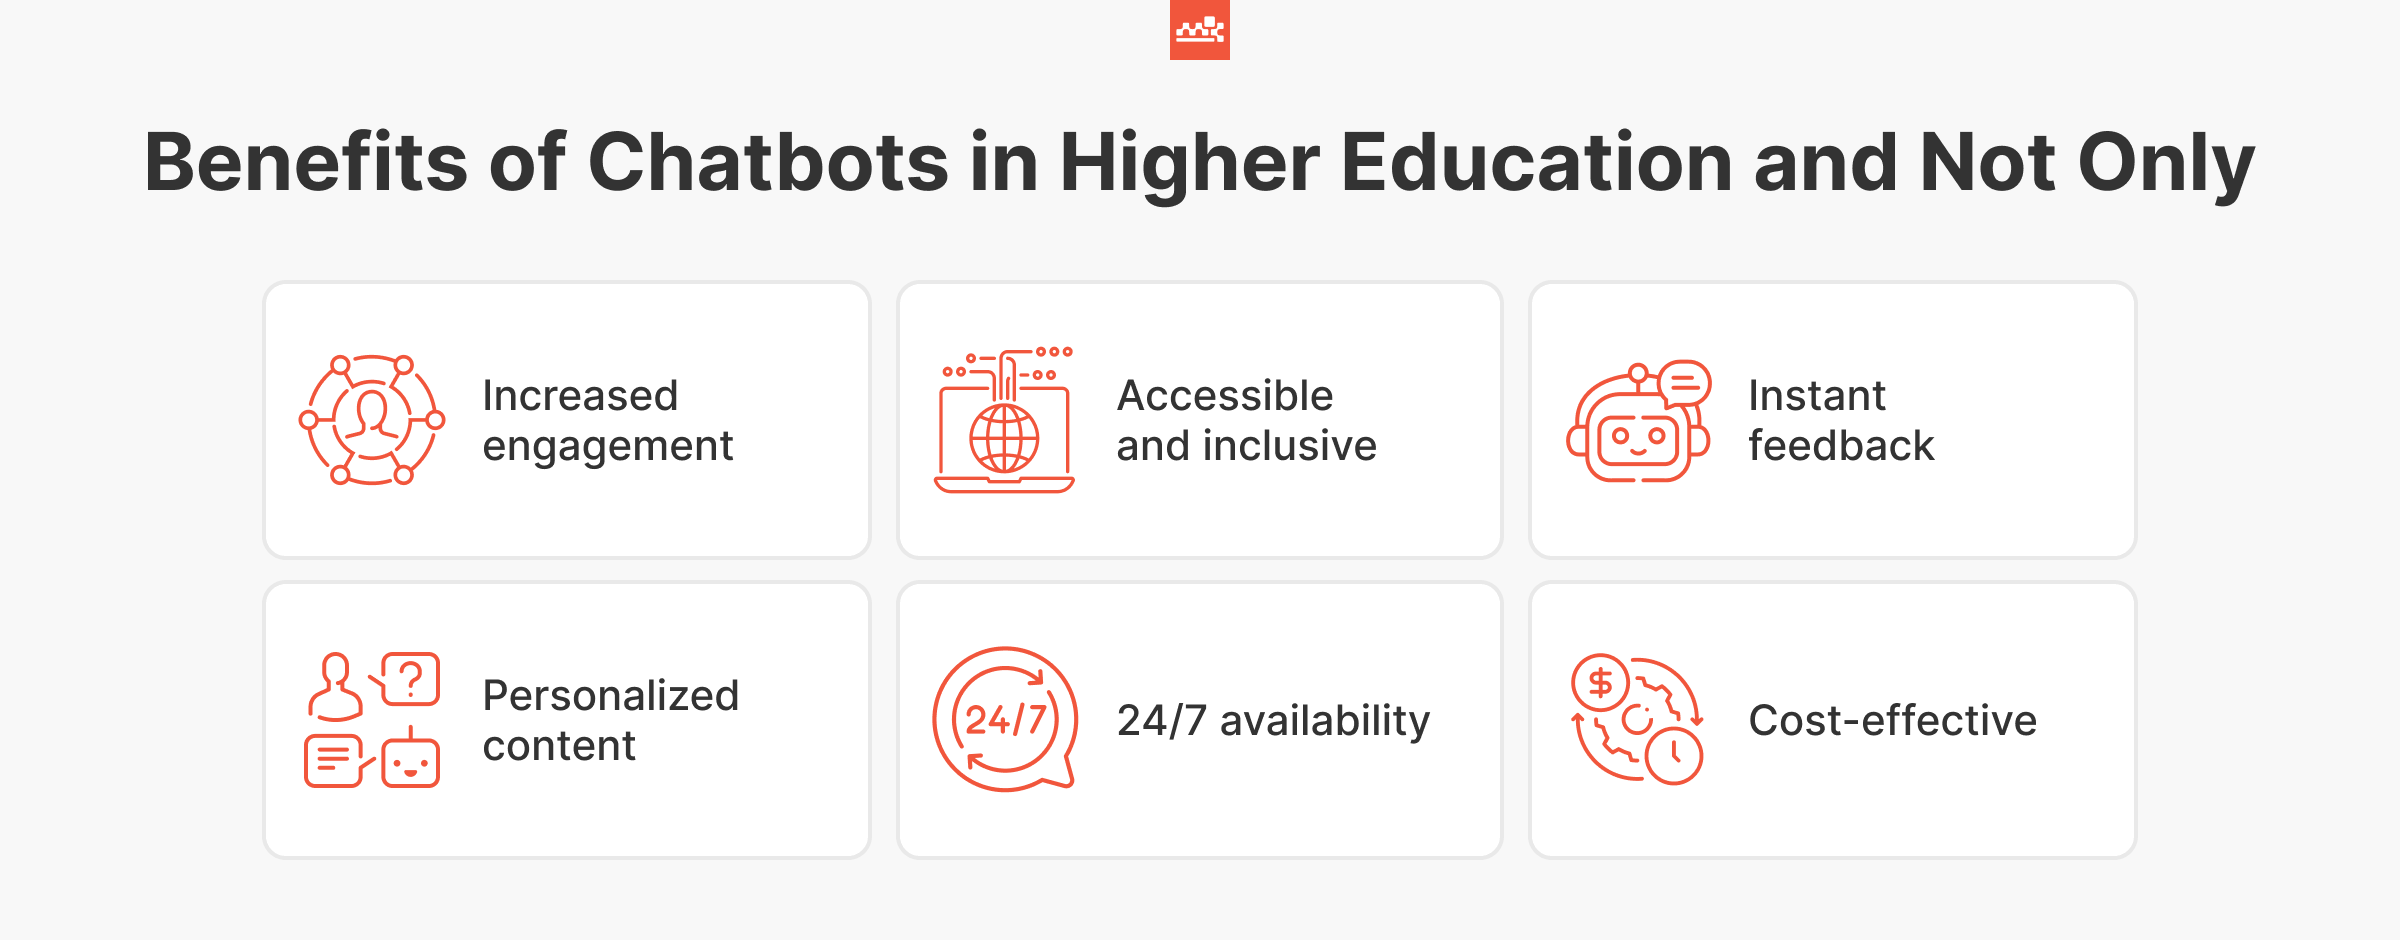 Benefits of Chatbots in Higher Education